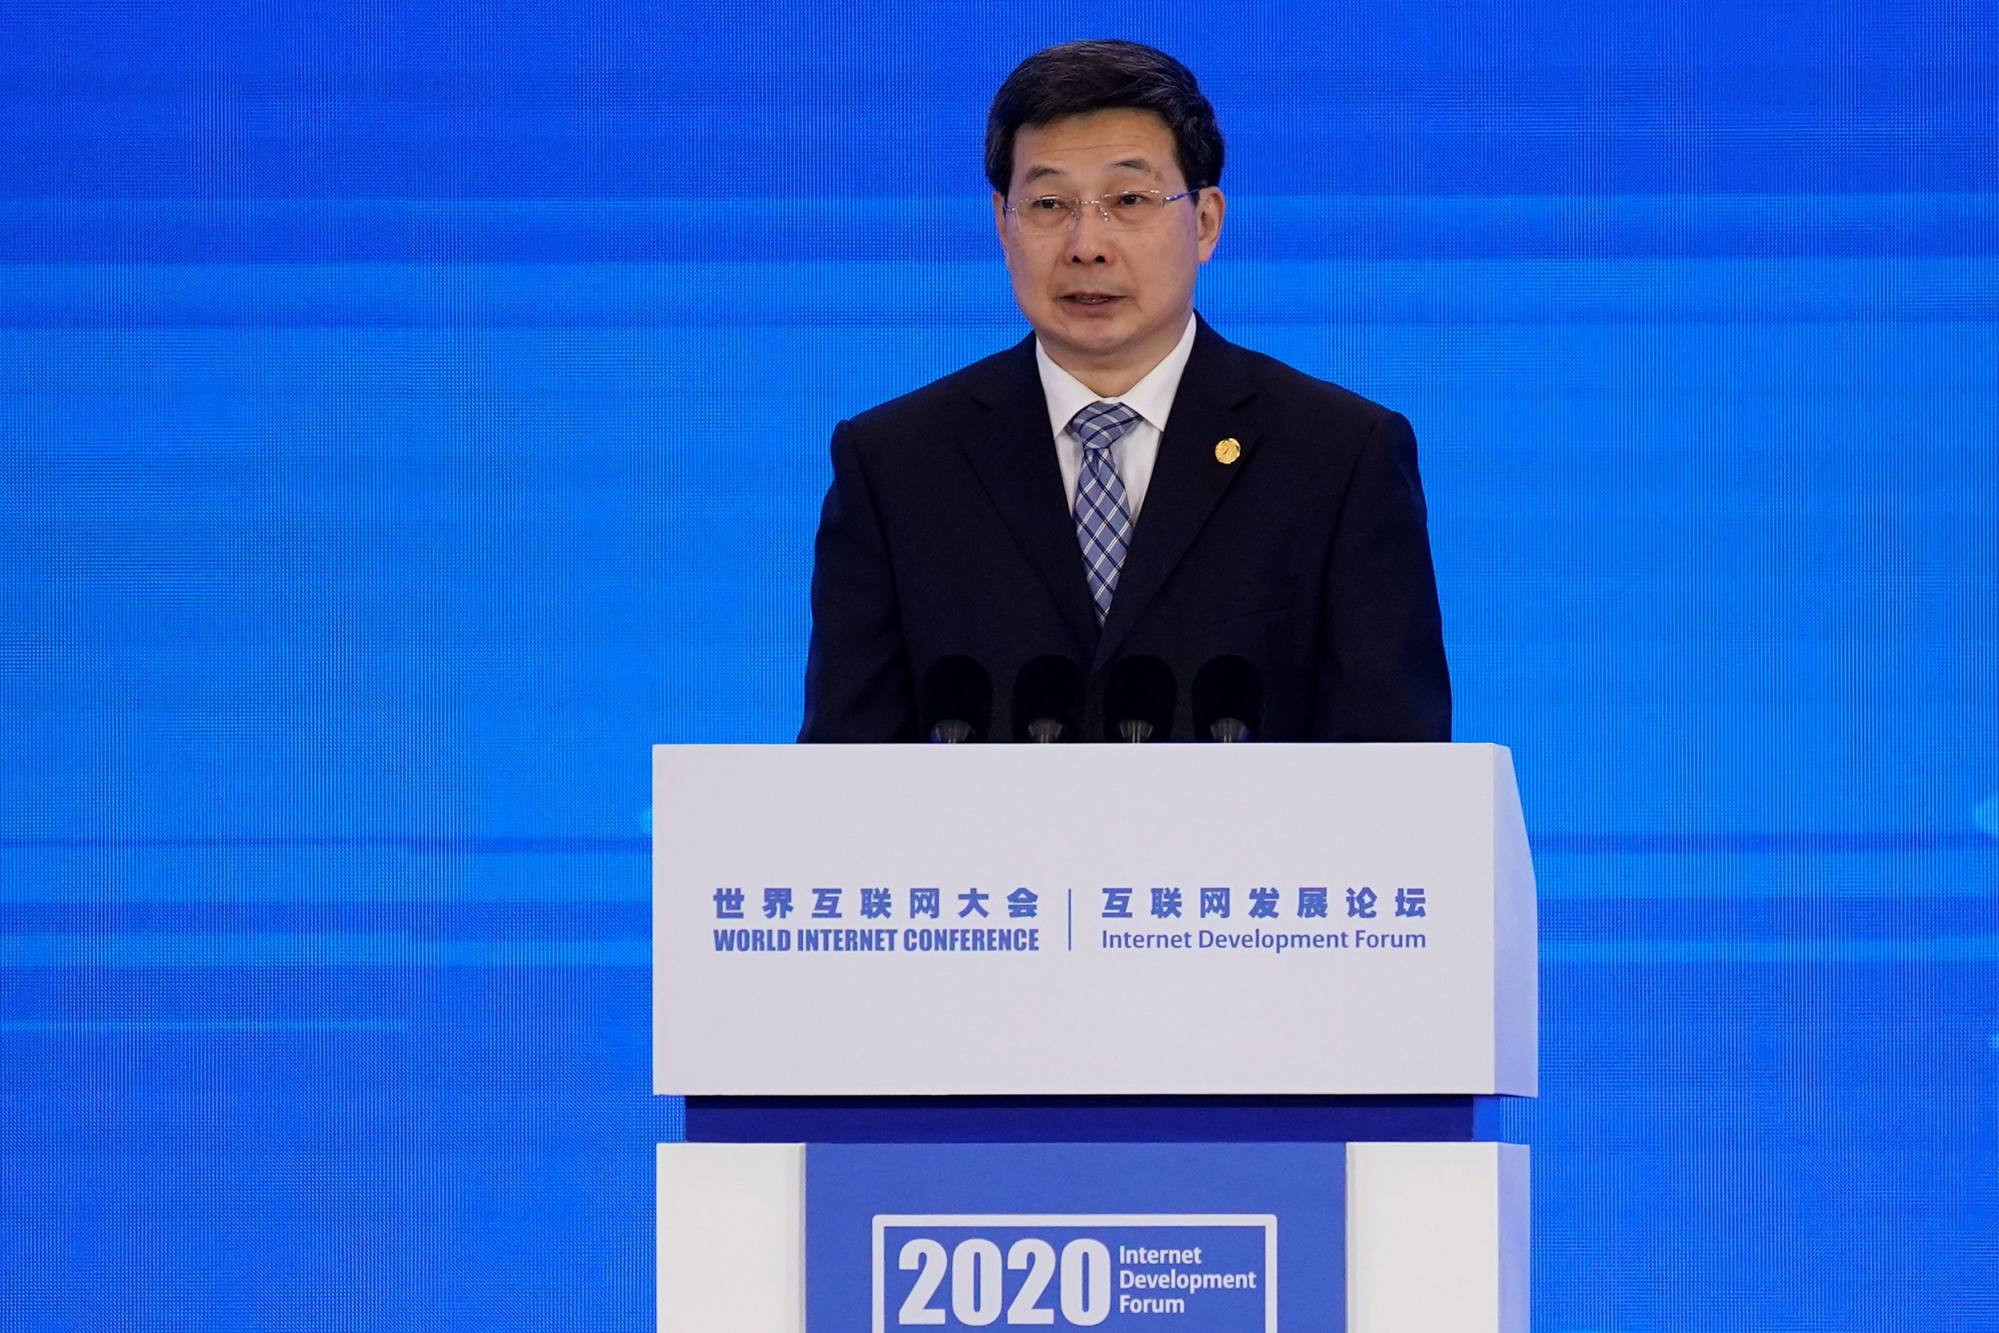 Zhuang Rongwen, head of the Cyberspace Administration of China, at the opening ceremony of the World Internet Conference (WIC) in Wuzhen, Zhejiang province, November 23, 2020. Photo: Reuters